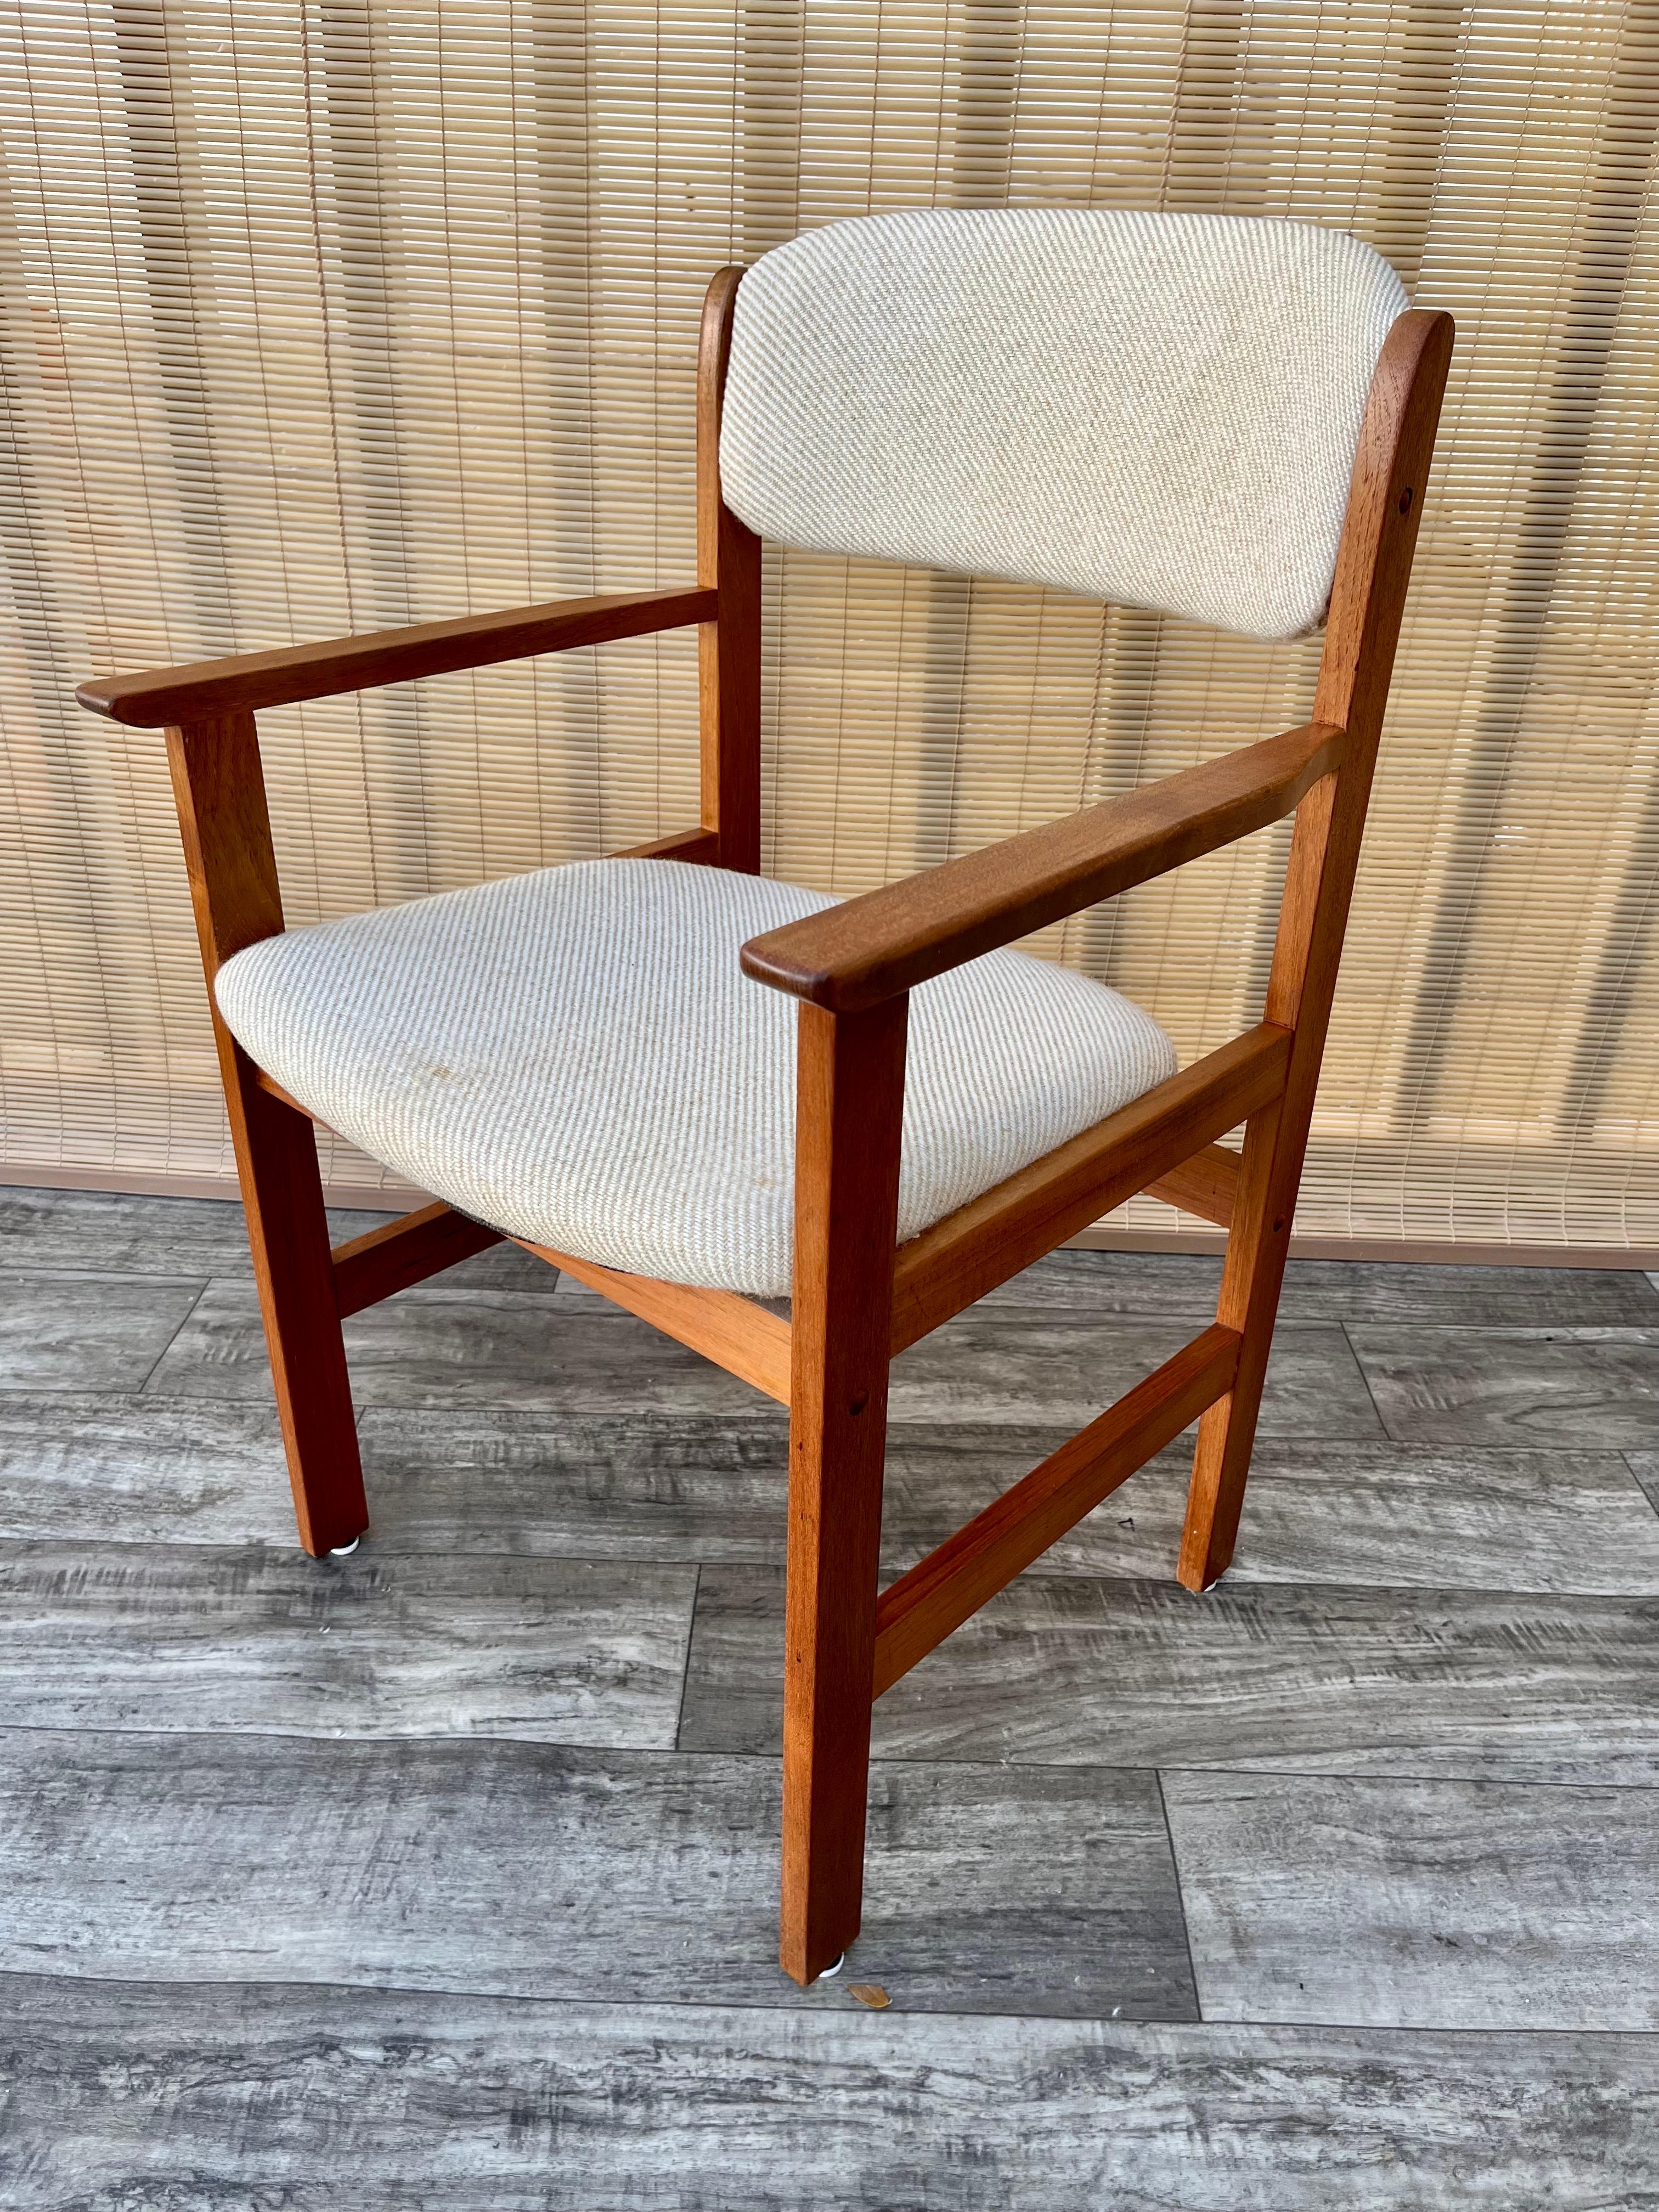 1980s Mid-Century Danish Modern Style Captain Chairs by Benny Linden Design. For Sale 4